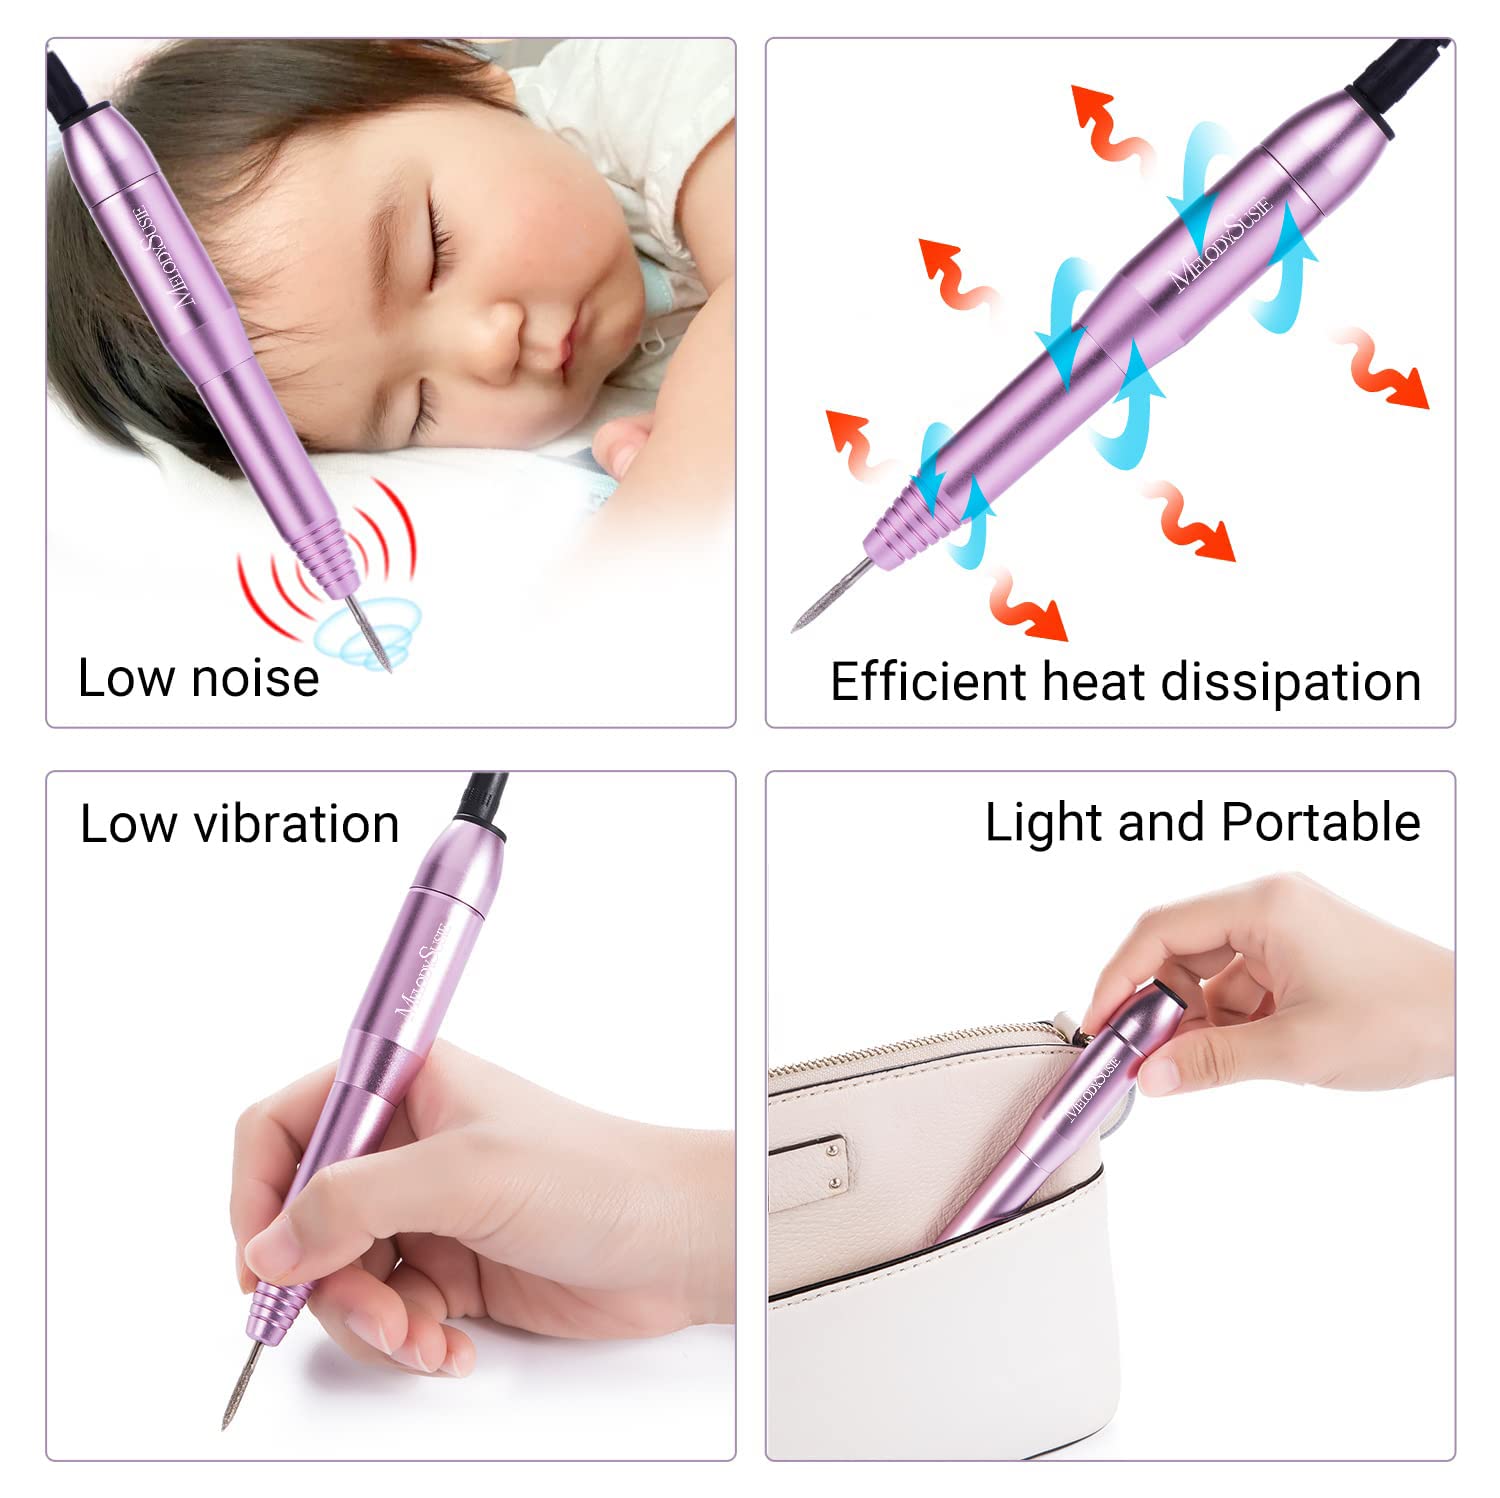 Portable Electric Nail Drill,Pc120B Compact Efile Electrical Professional Nail File Kit for Acrylic, Gel Nails, Manicure Pedicure Polishing Shape Tools Design for Home Salon Use, Purple